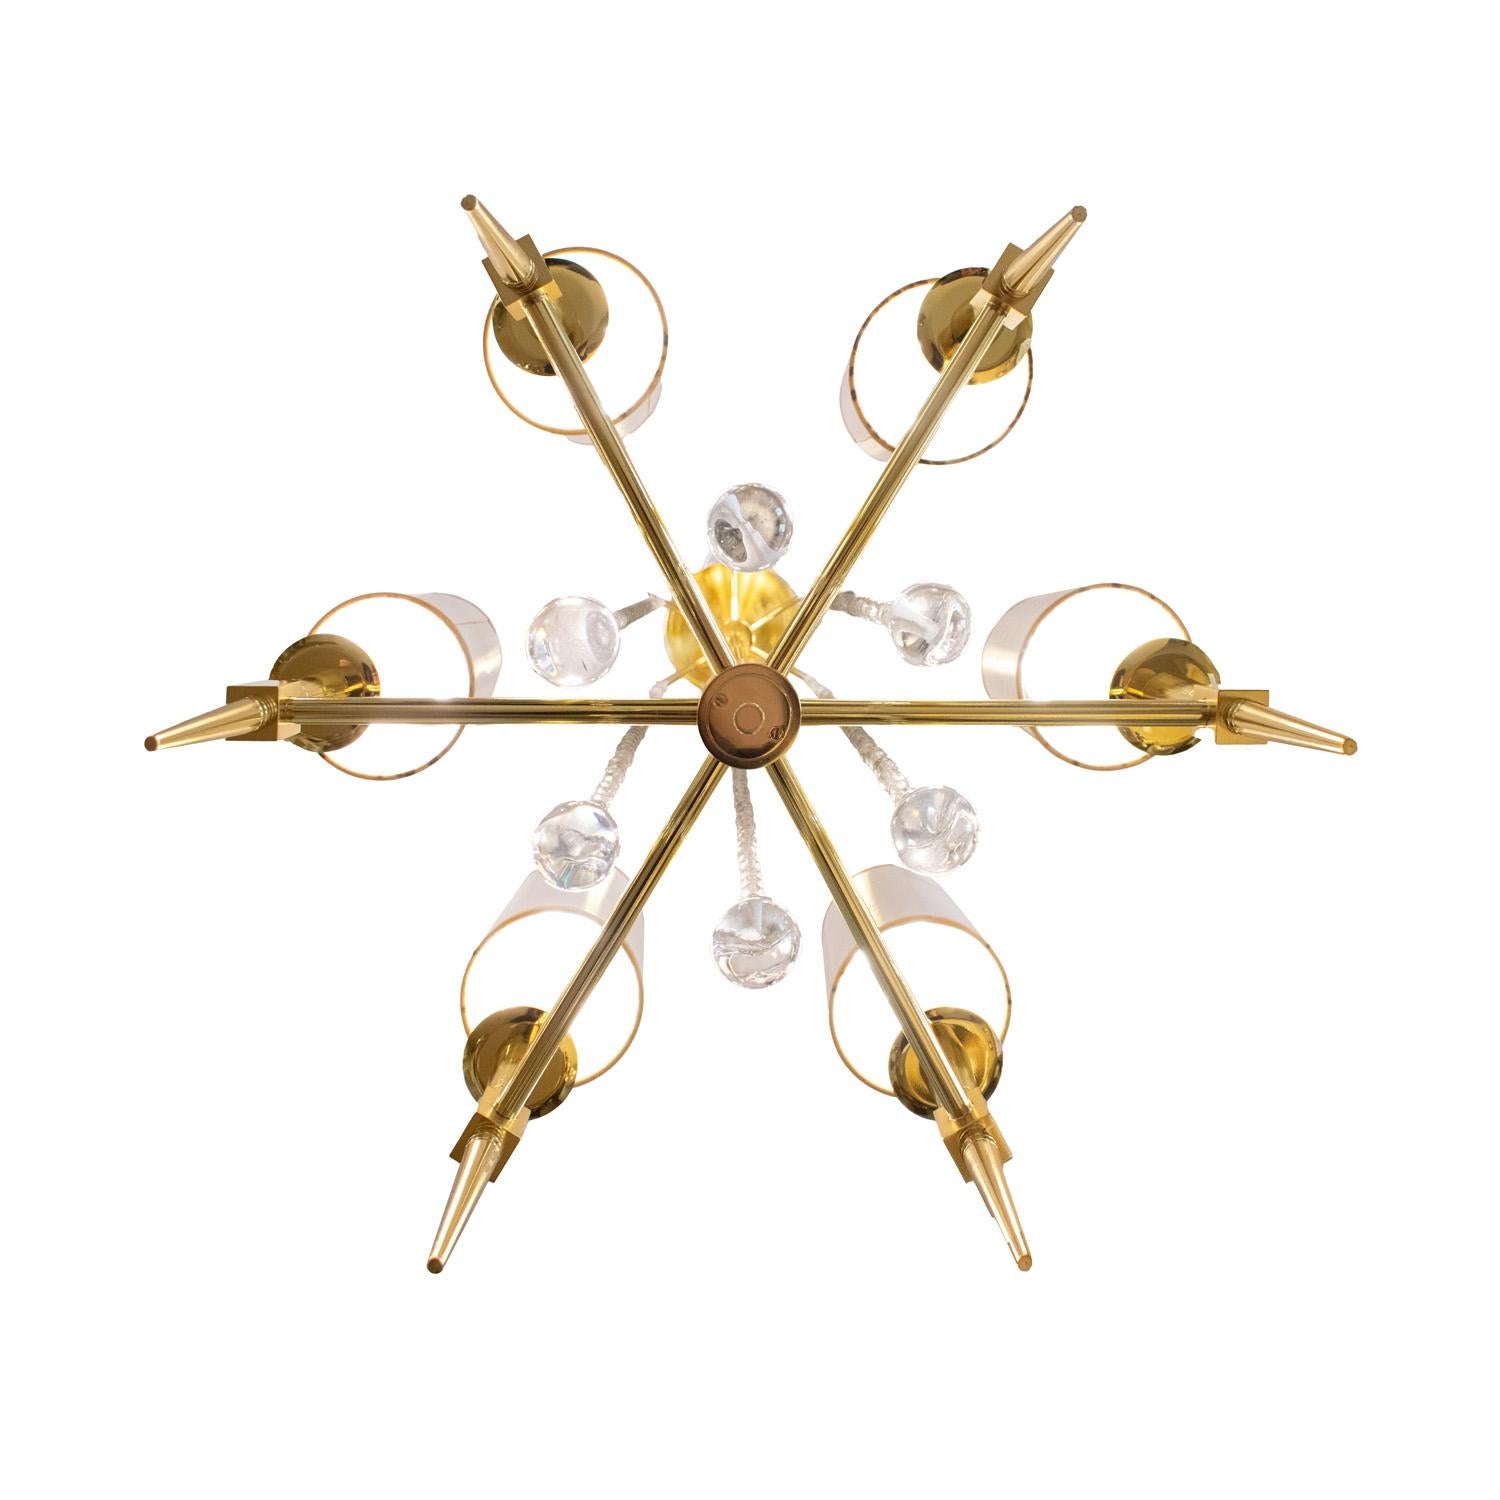 Mid-Century Modern Tommi Parzinger Elegant 6 Arm Chandelier in Brass with Crystal Beads 1950s For Sale